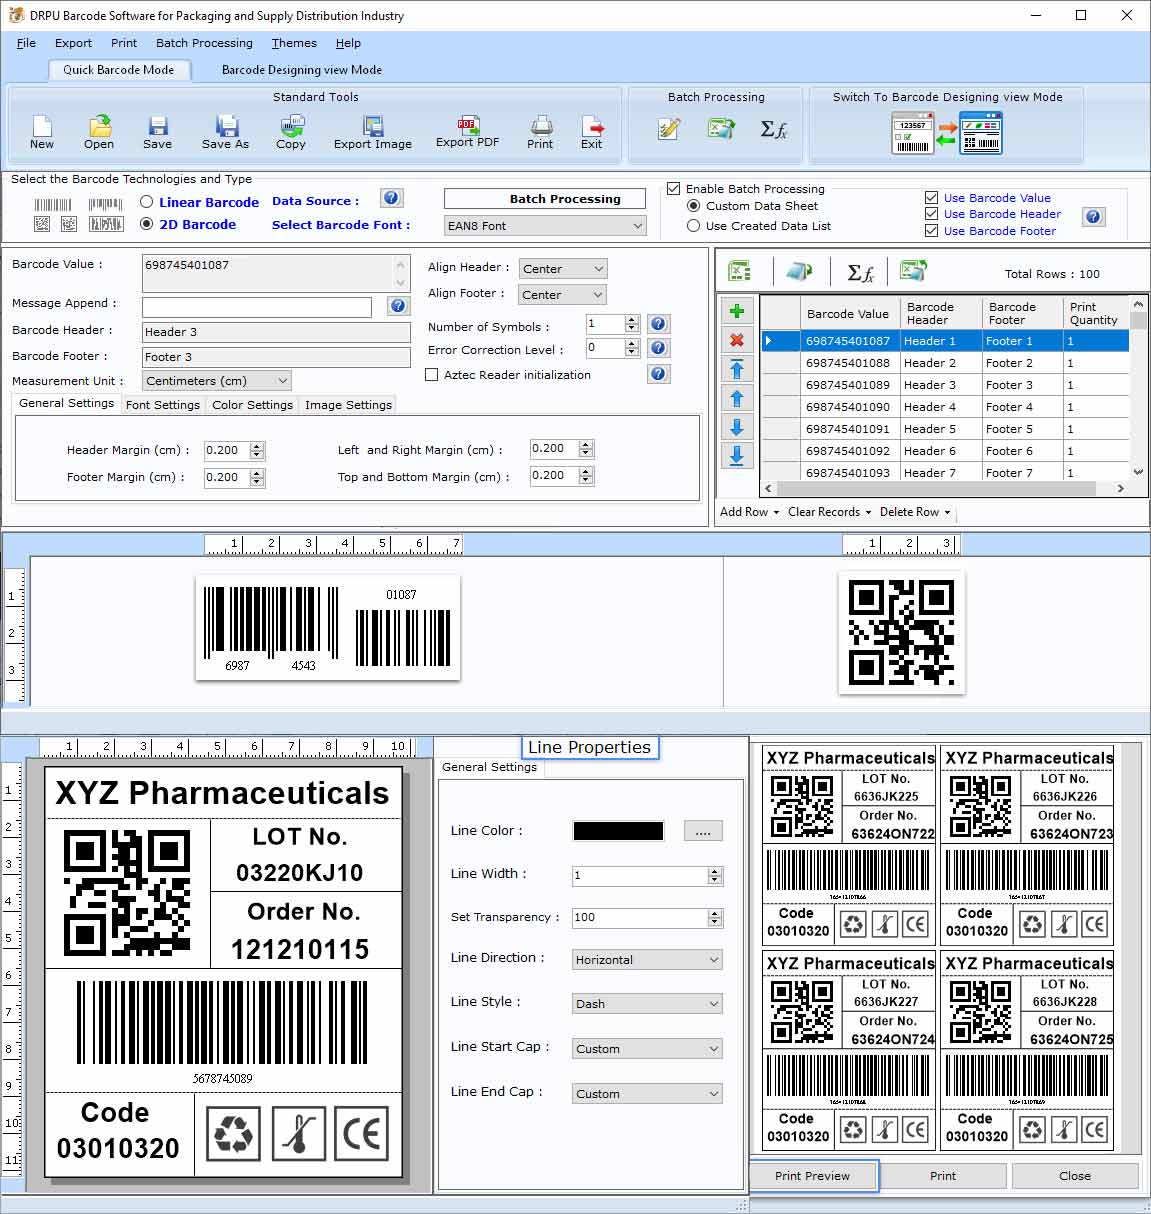 Barcode for Distribution Industry 7.3.0.1